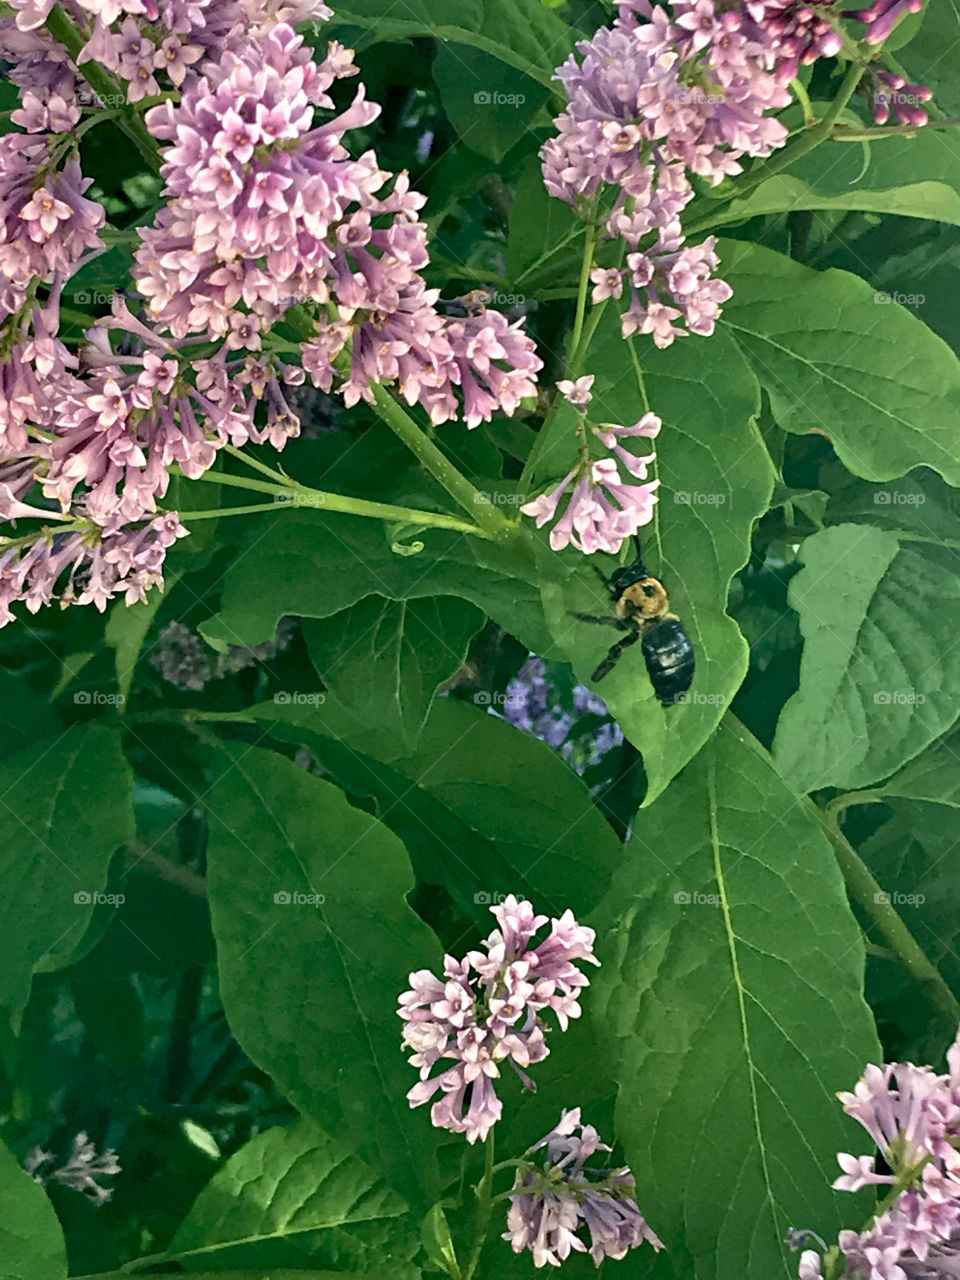 Bee in the lilac bush 